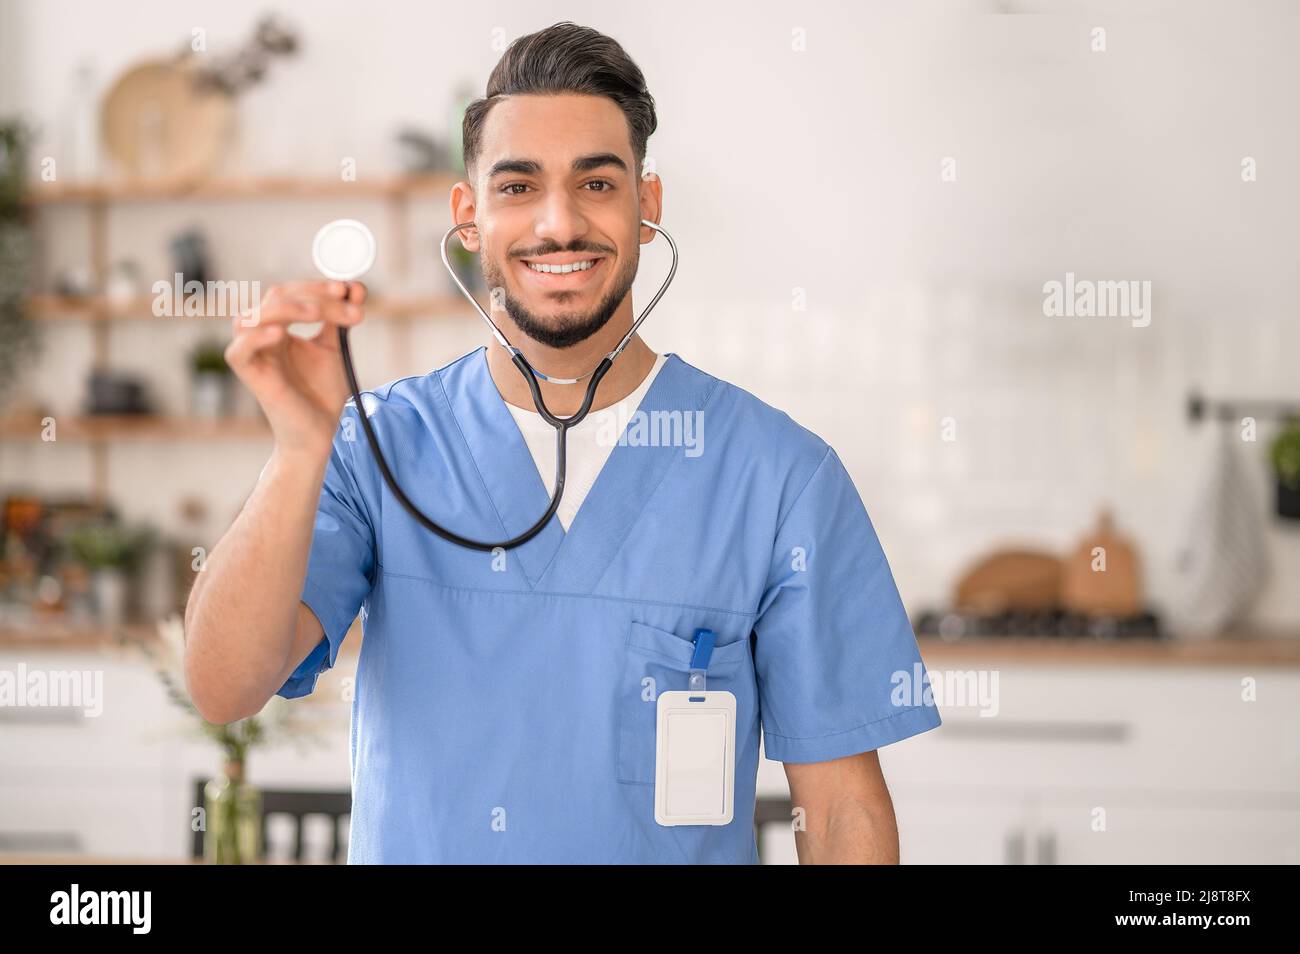 Joyous physician showing a medical instrument before the camera Stock Photo